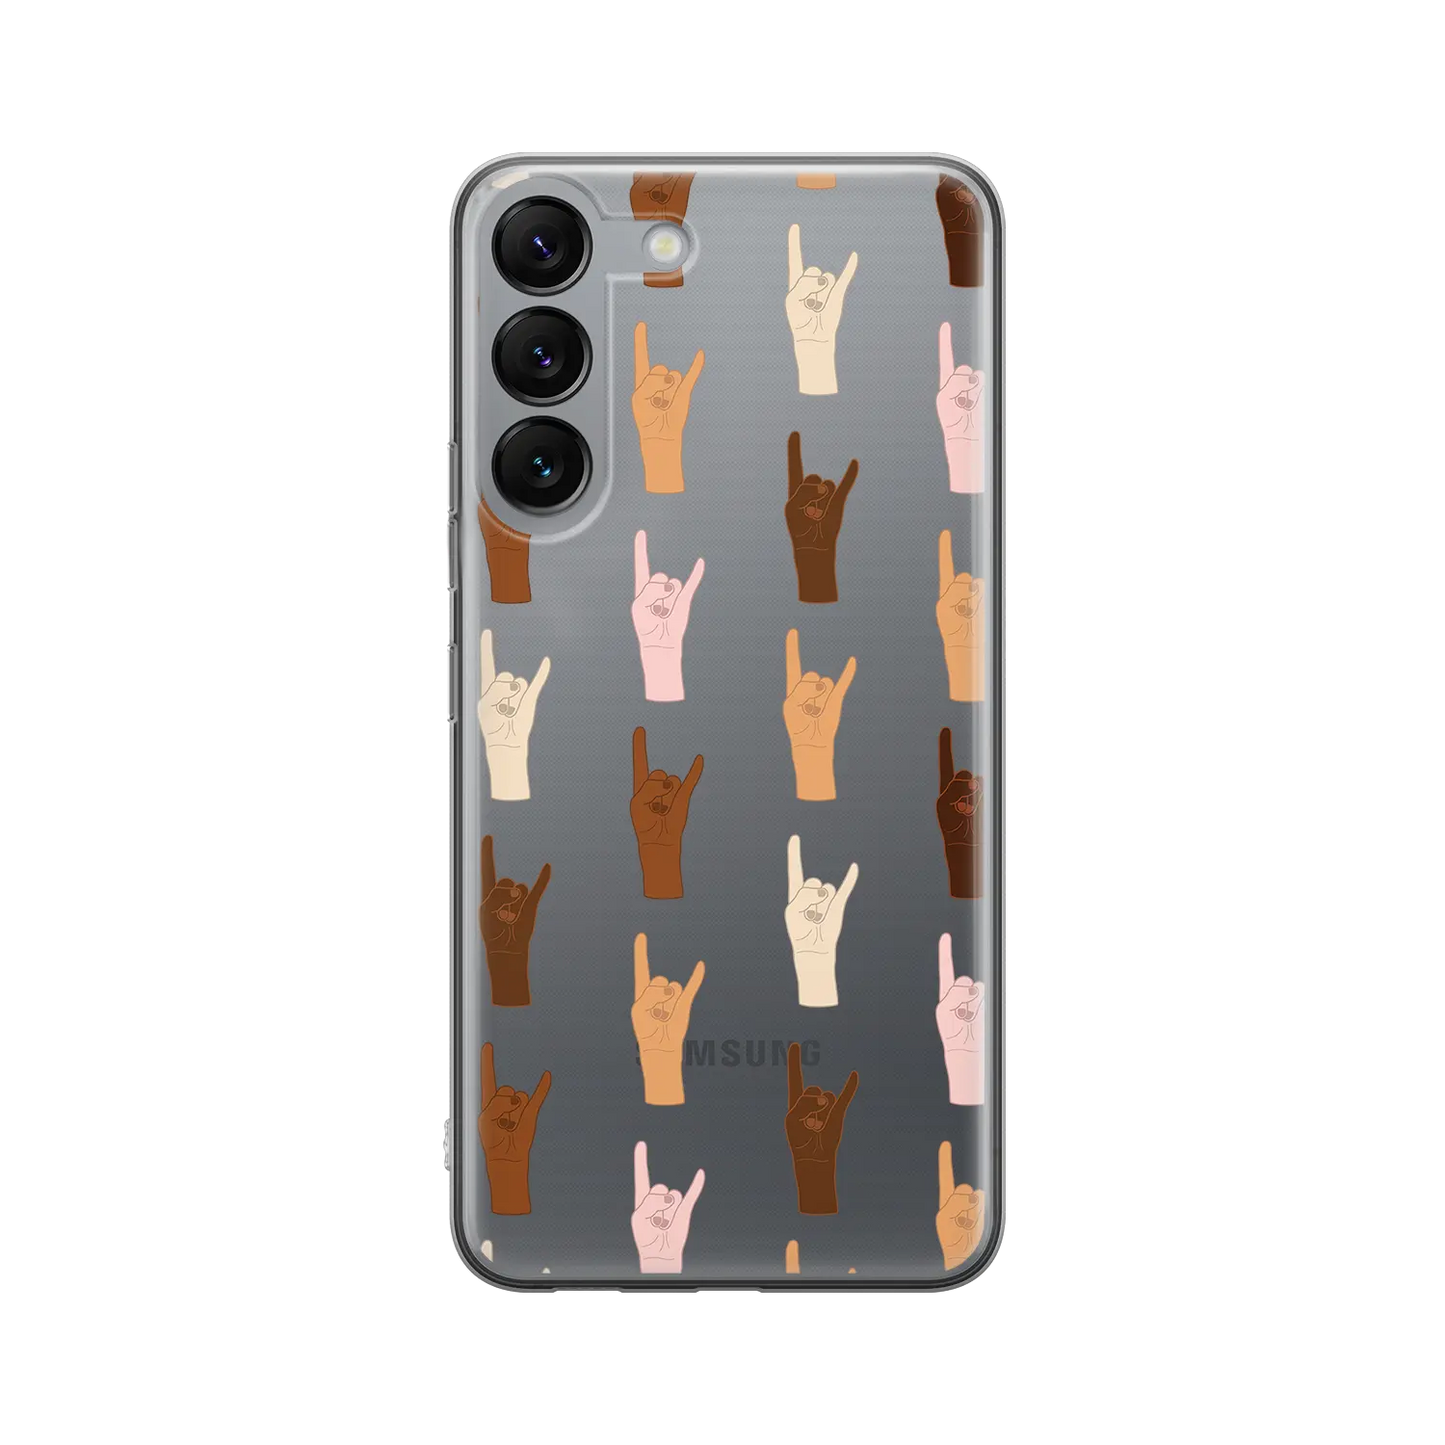 Hands of the World - Personalised Galaxy S Case